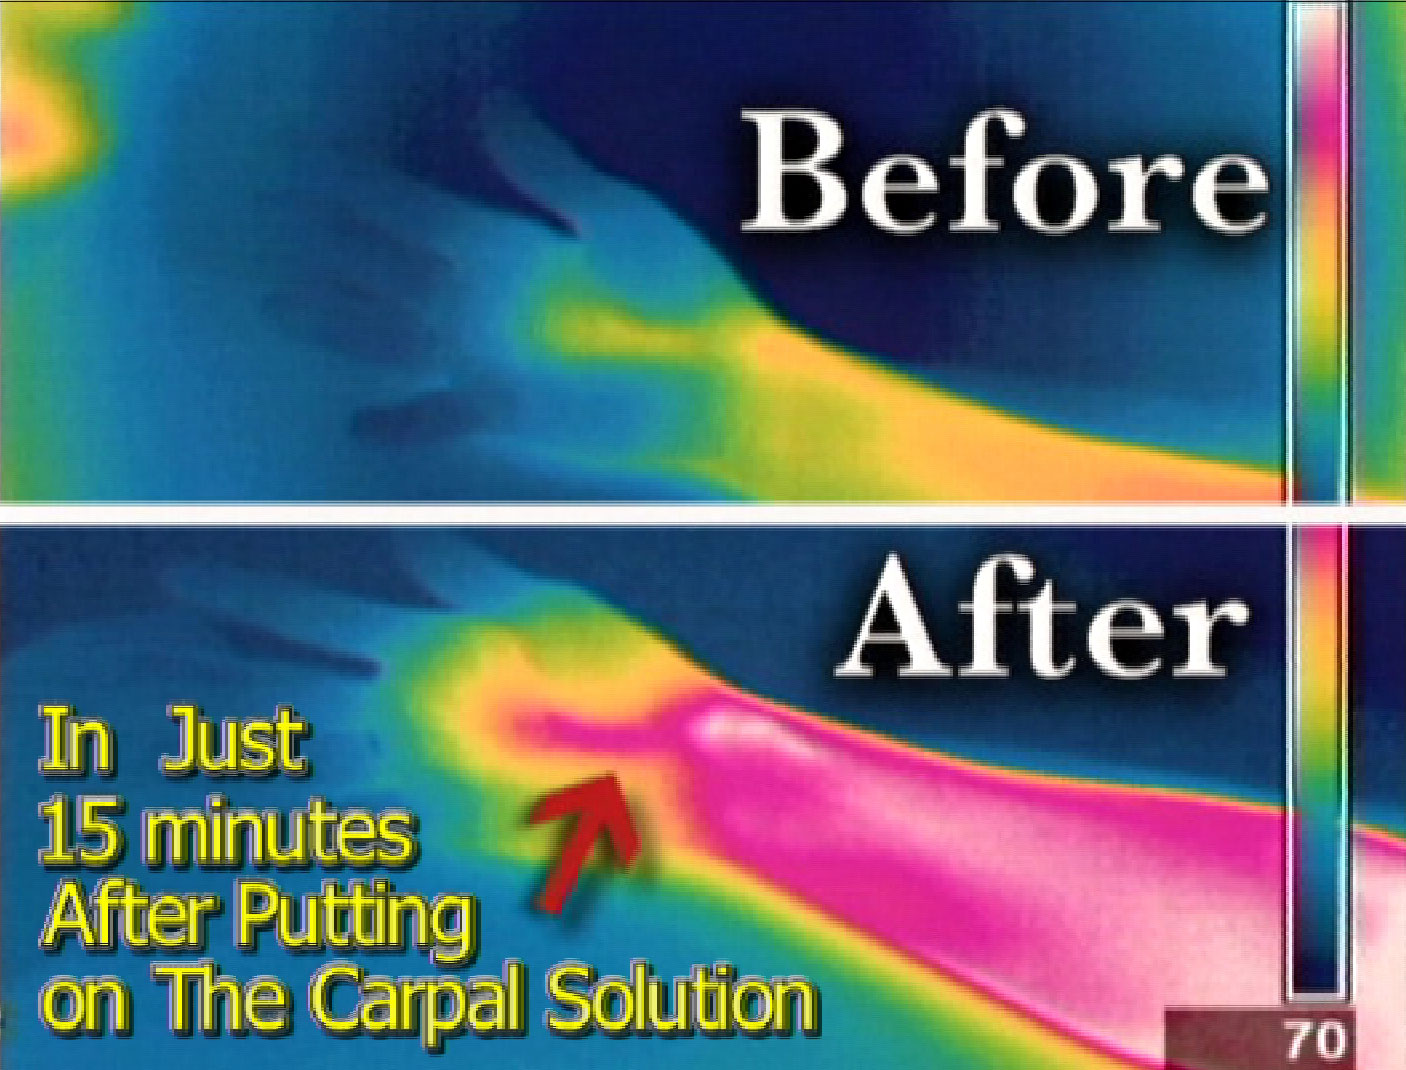 thermal imaging picture shows how the carpal solution increases blood circulation after wearing it for only 15 mintues